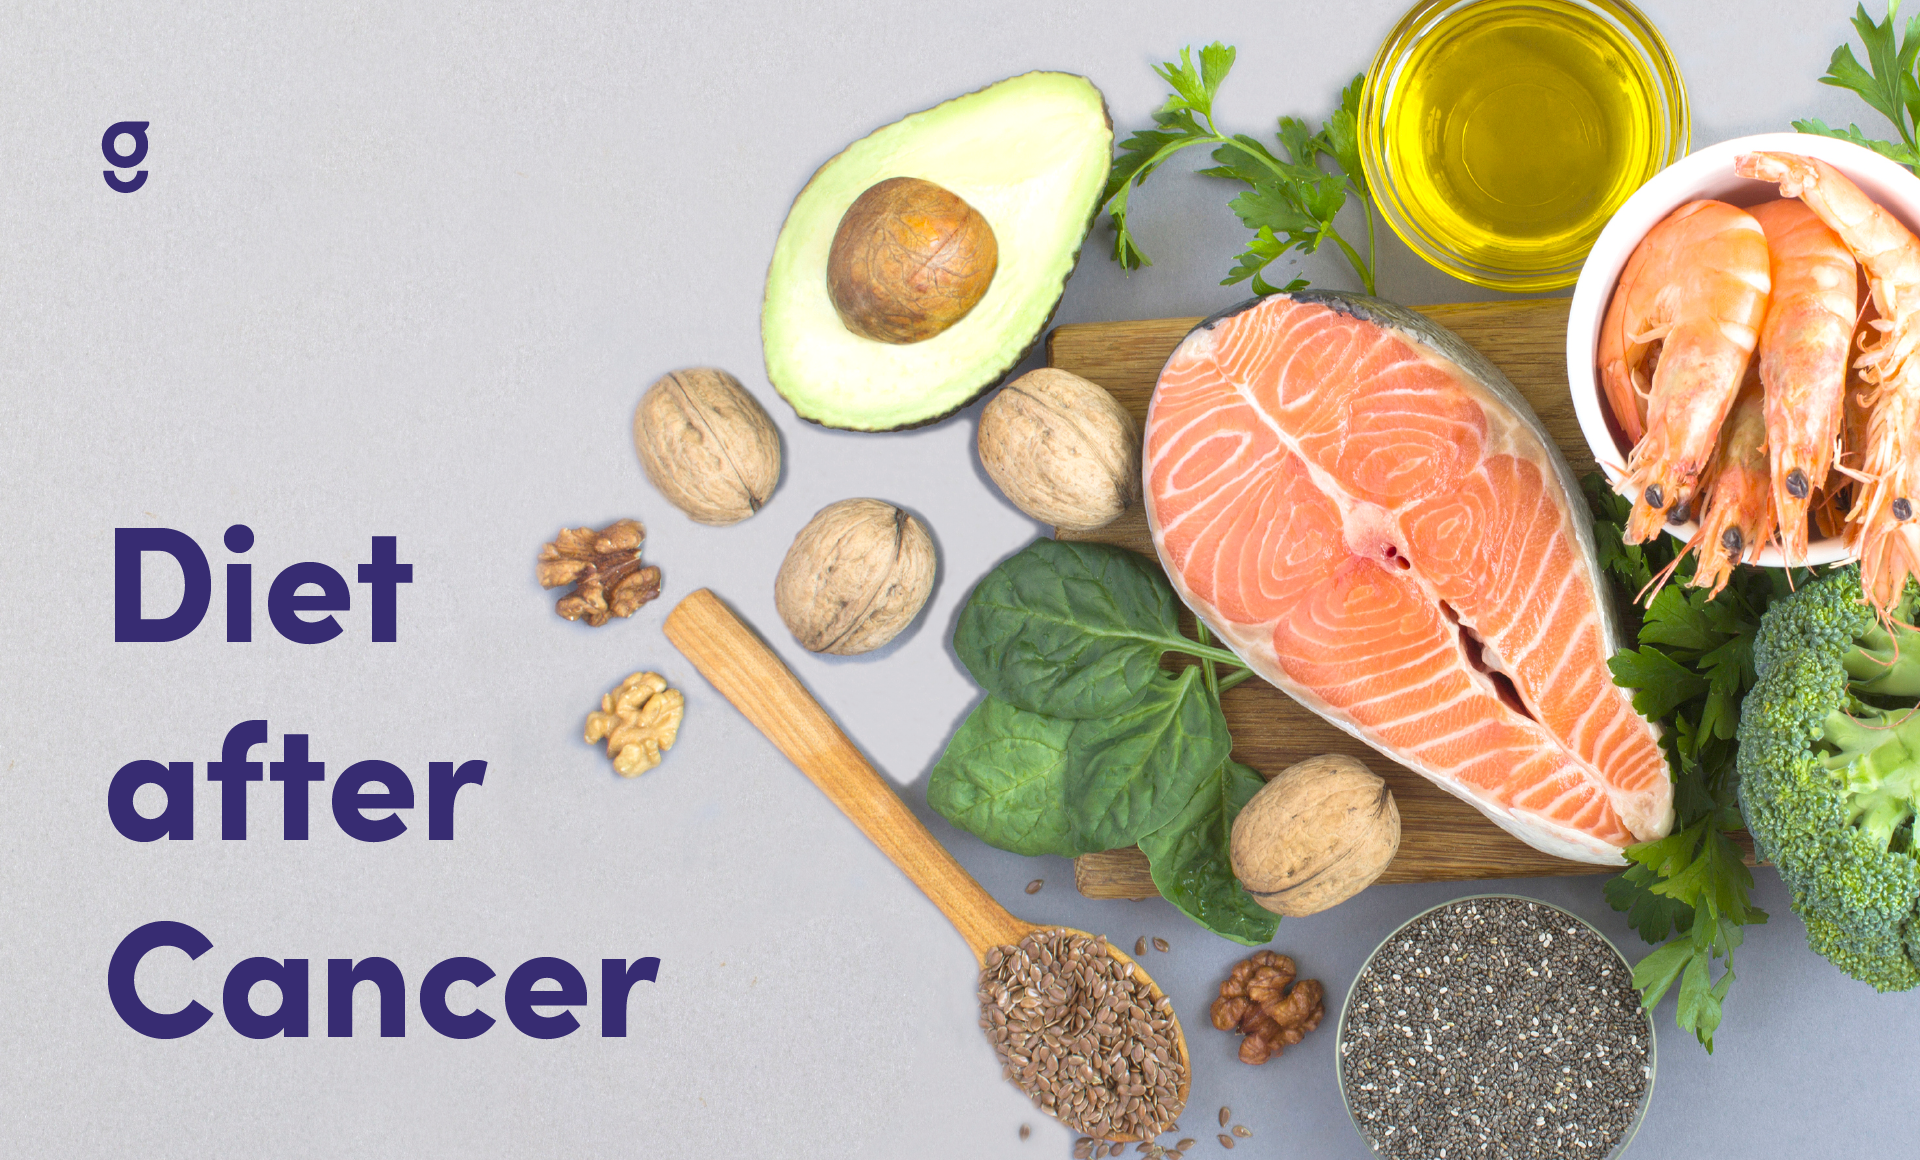 Diet after Cancer: How to Nourish Your Body as a Cancer Survivor